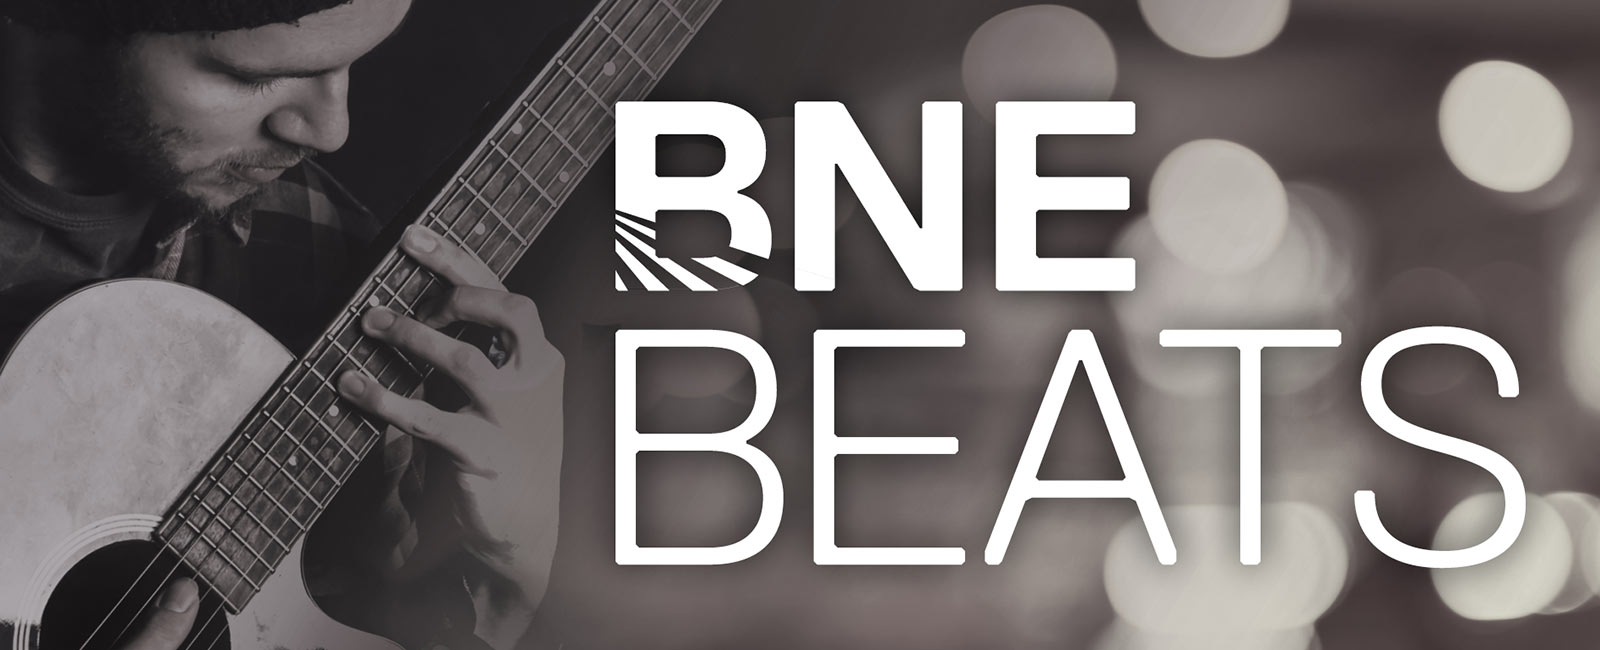 What's On BNE Beats